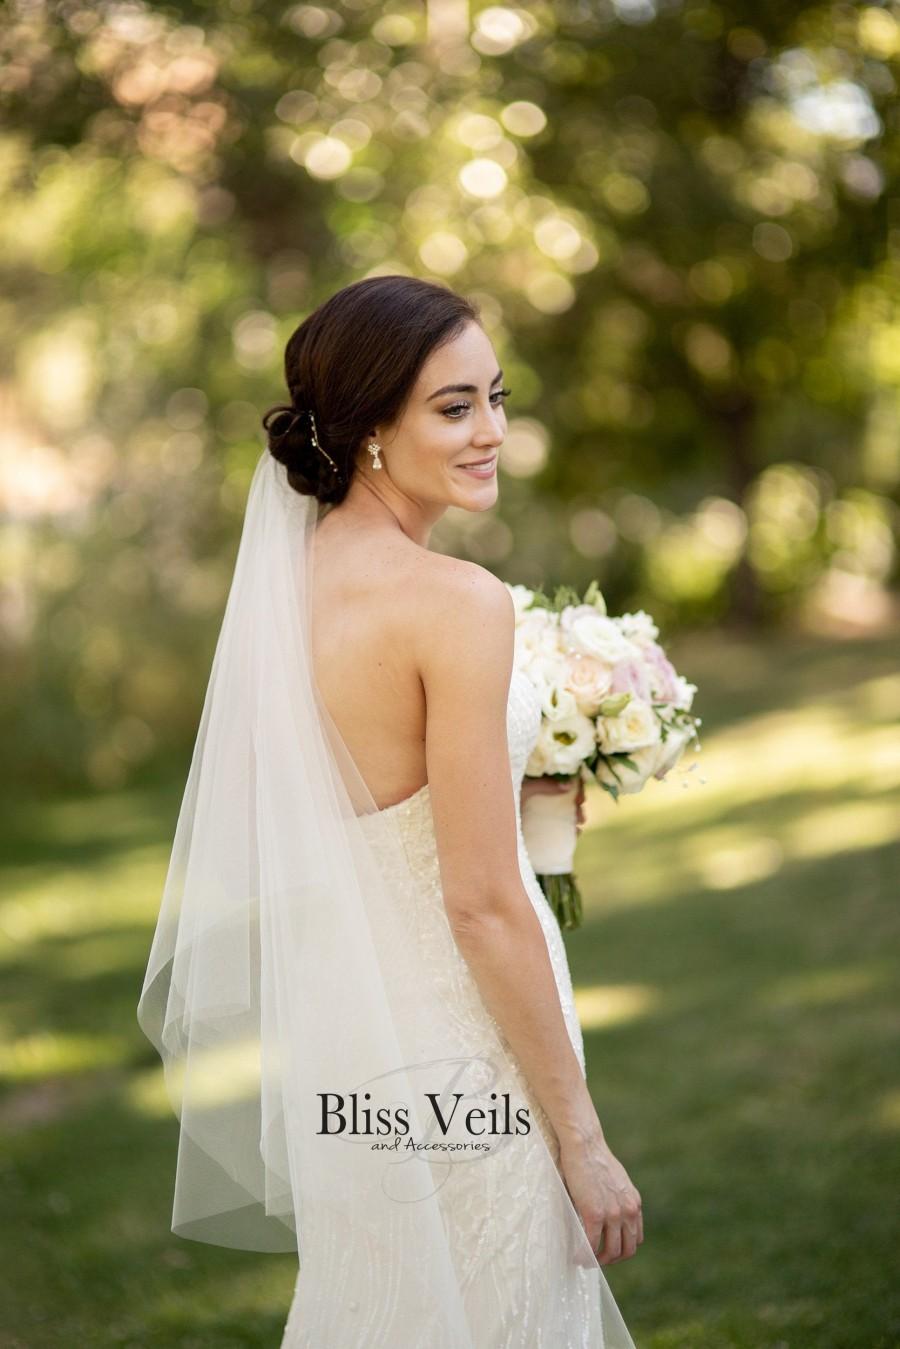 Свадьба - Gorgeous 2 Tier Plain Edge Drop Veil - Veil with Blusher - Available in 9 Lengths & 10 Colors, Fast Shipping!